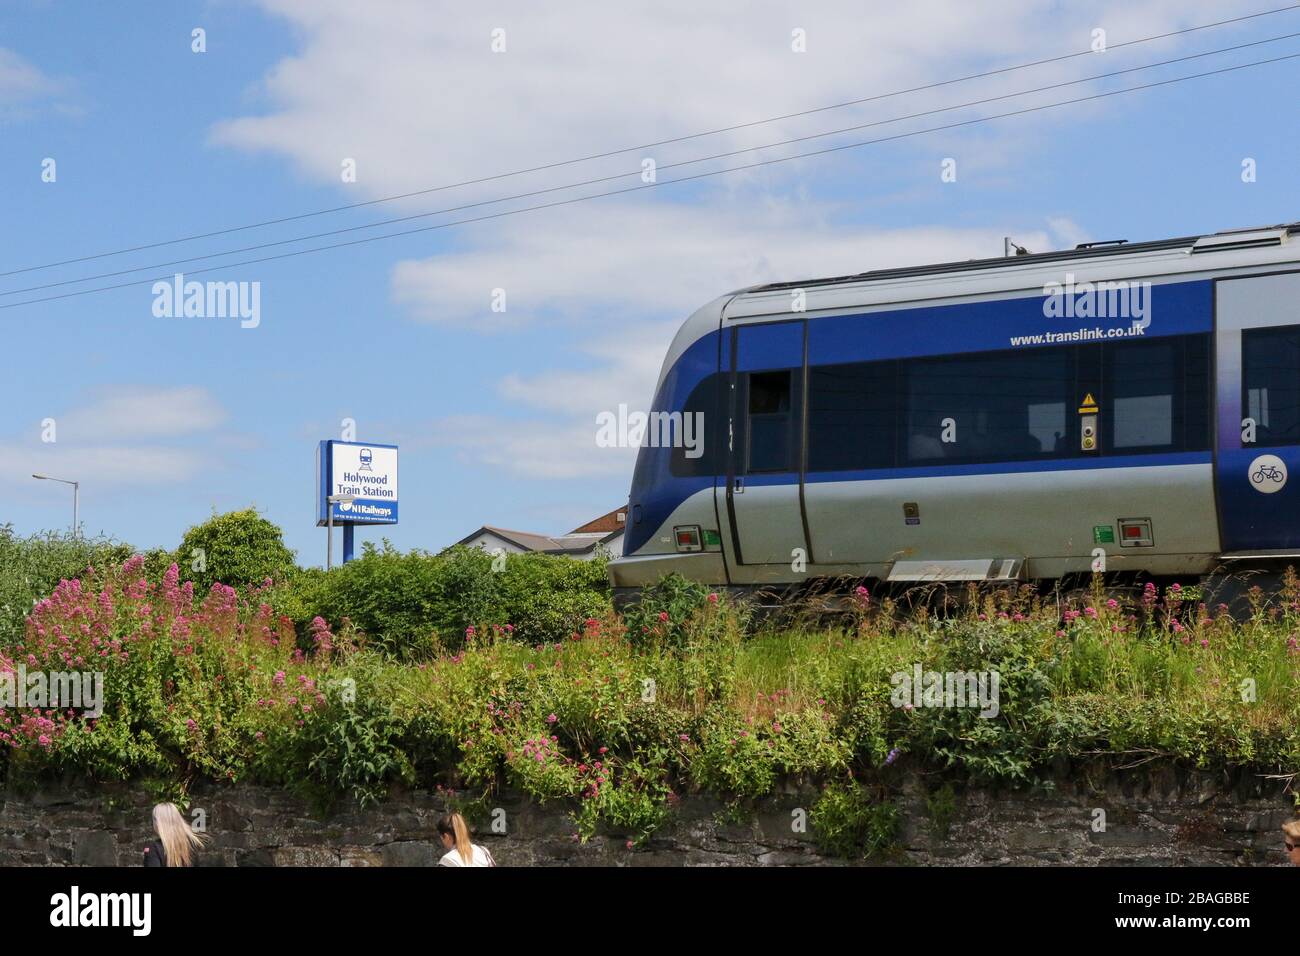 NIR Translink commuter CAF train leaving Holywood Station in County Down. with disembarked passengers walking alongside the railway embankment. Stock Photo